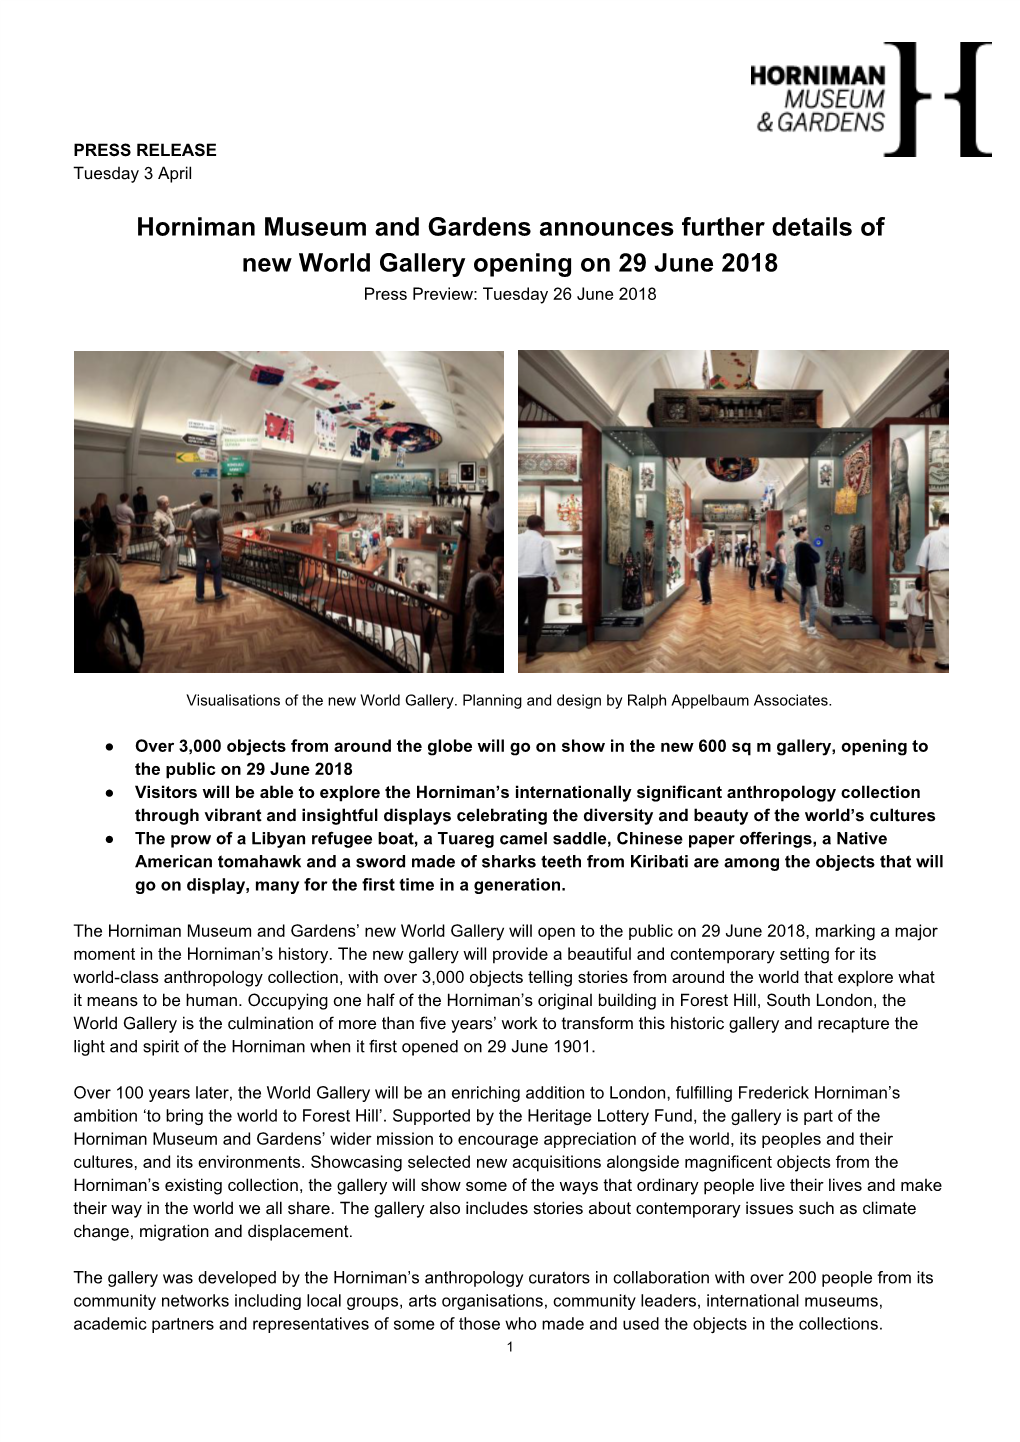 Horniman Museum and Gardens Announces Further Details of New World Gallery Opening on 29 June 2018 Press Preview: Tuesday 26 June 2018